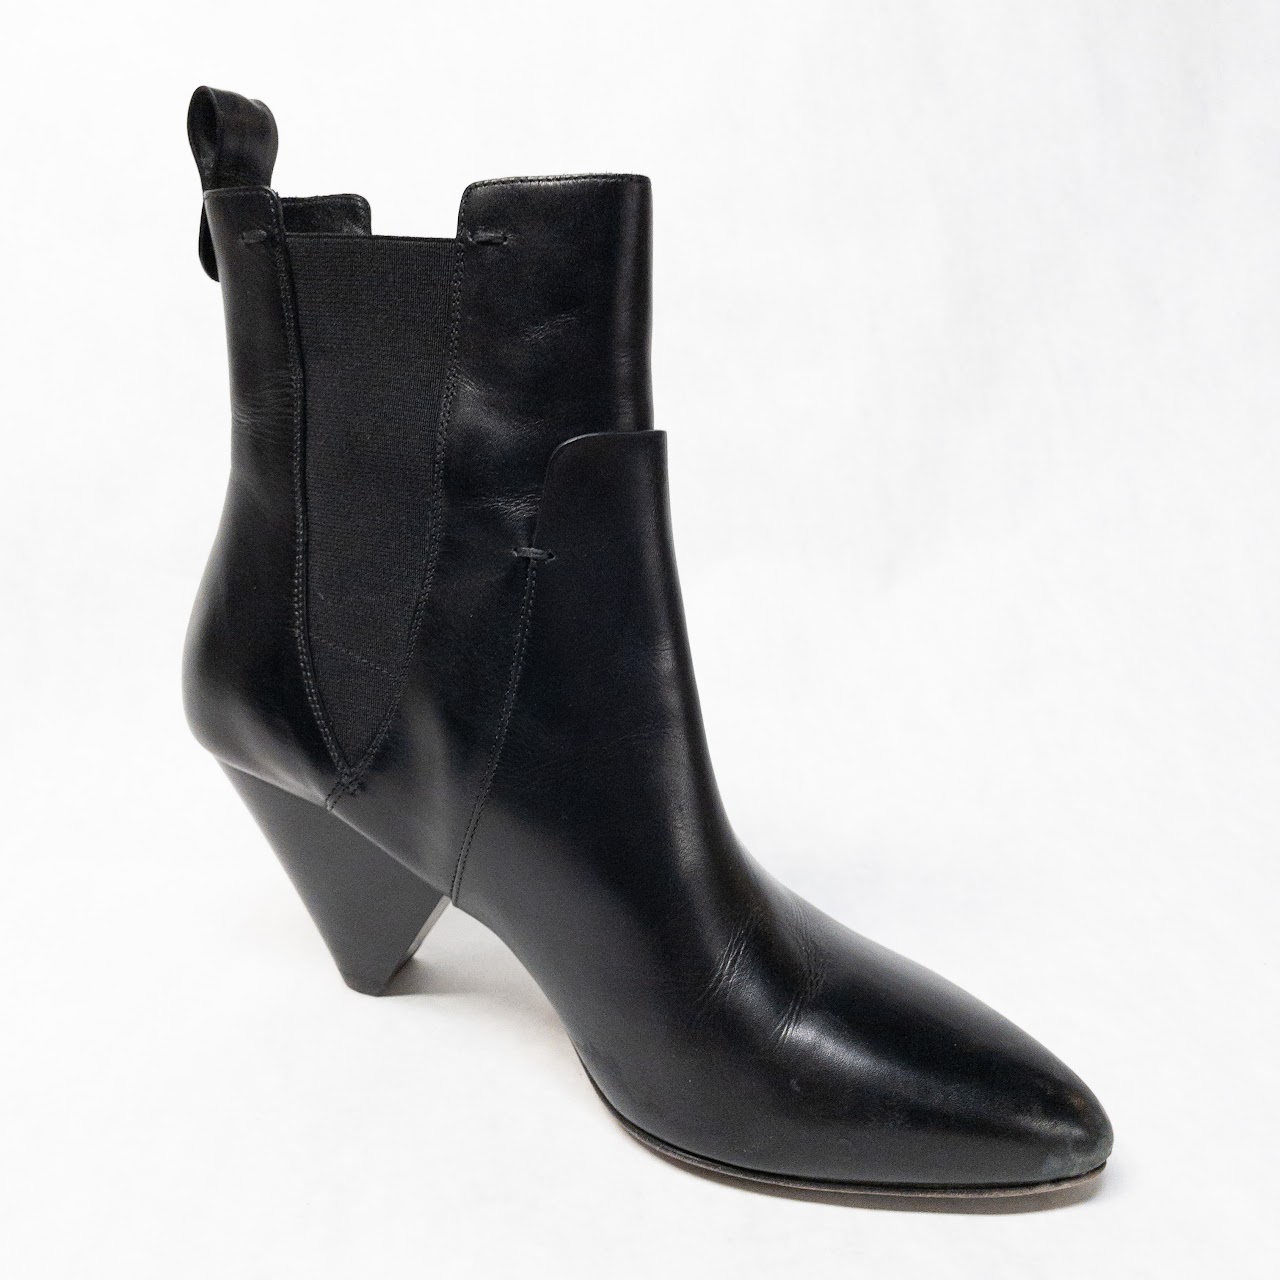 Veronica Beard Black Leather Ankle Boots